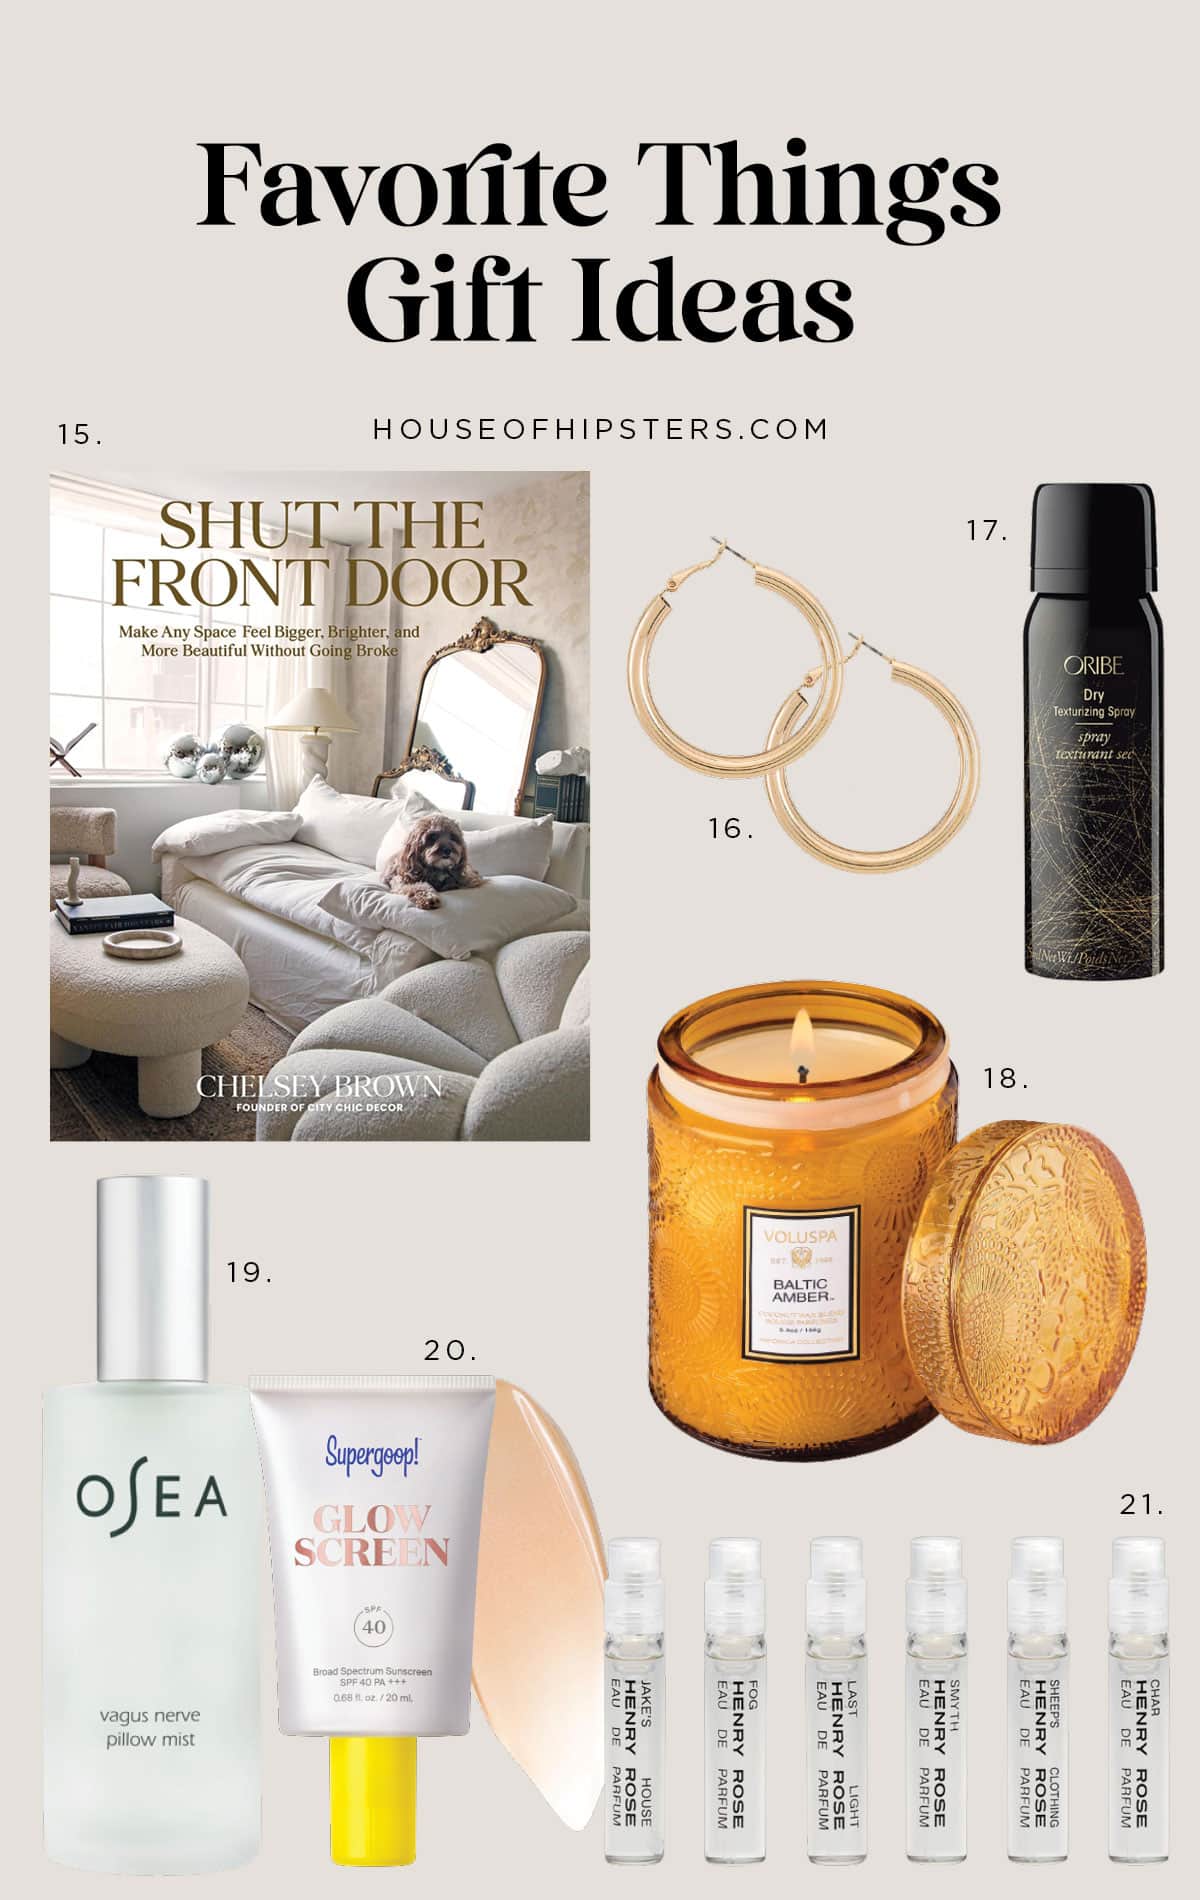 Bougie Favorite Things Gift Ideas - Get inspired by these Favorite Things Gift Ideas for your next holiday party from the best smelling candle to affordable good hoop earrings to perfume!